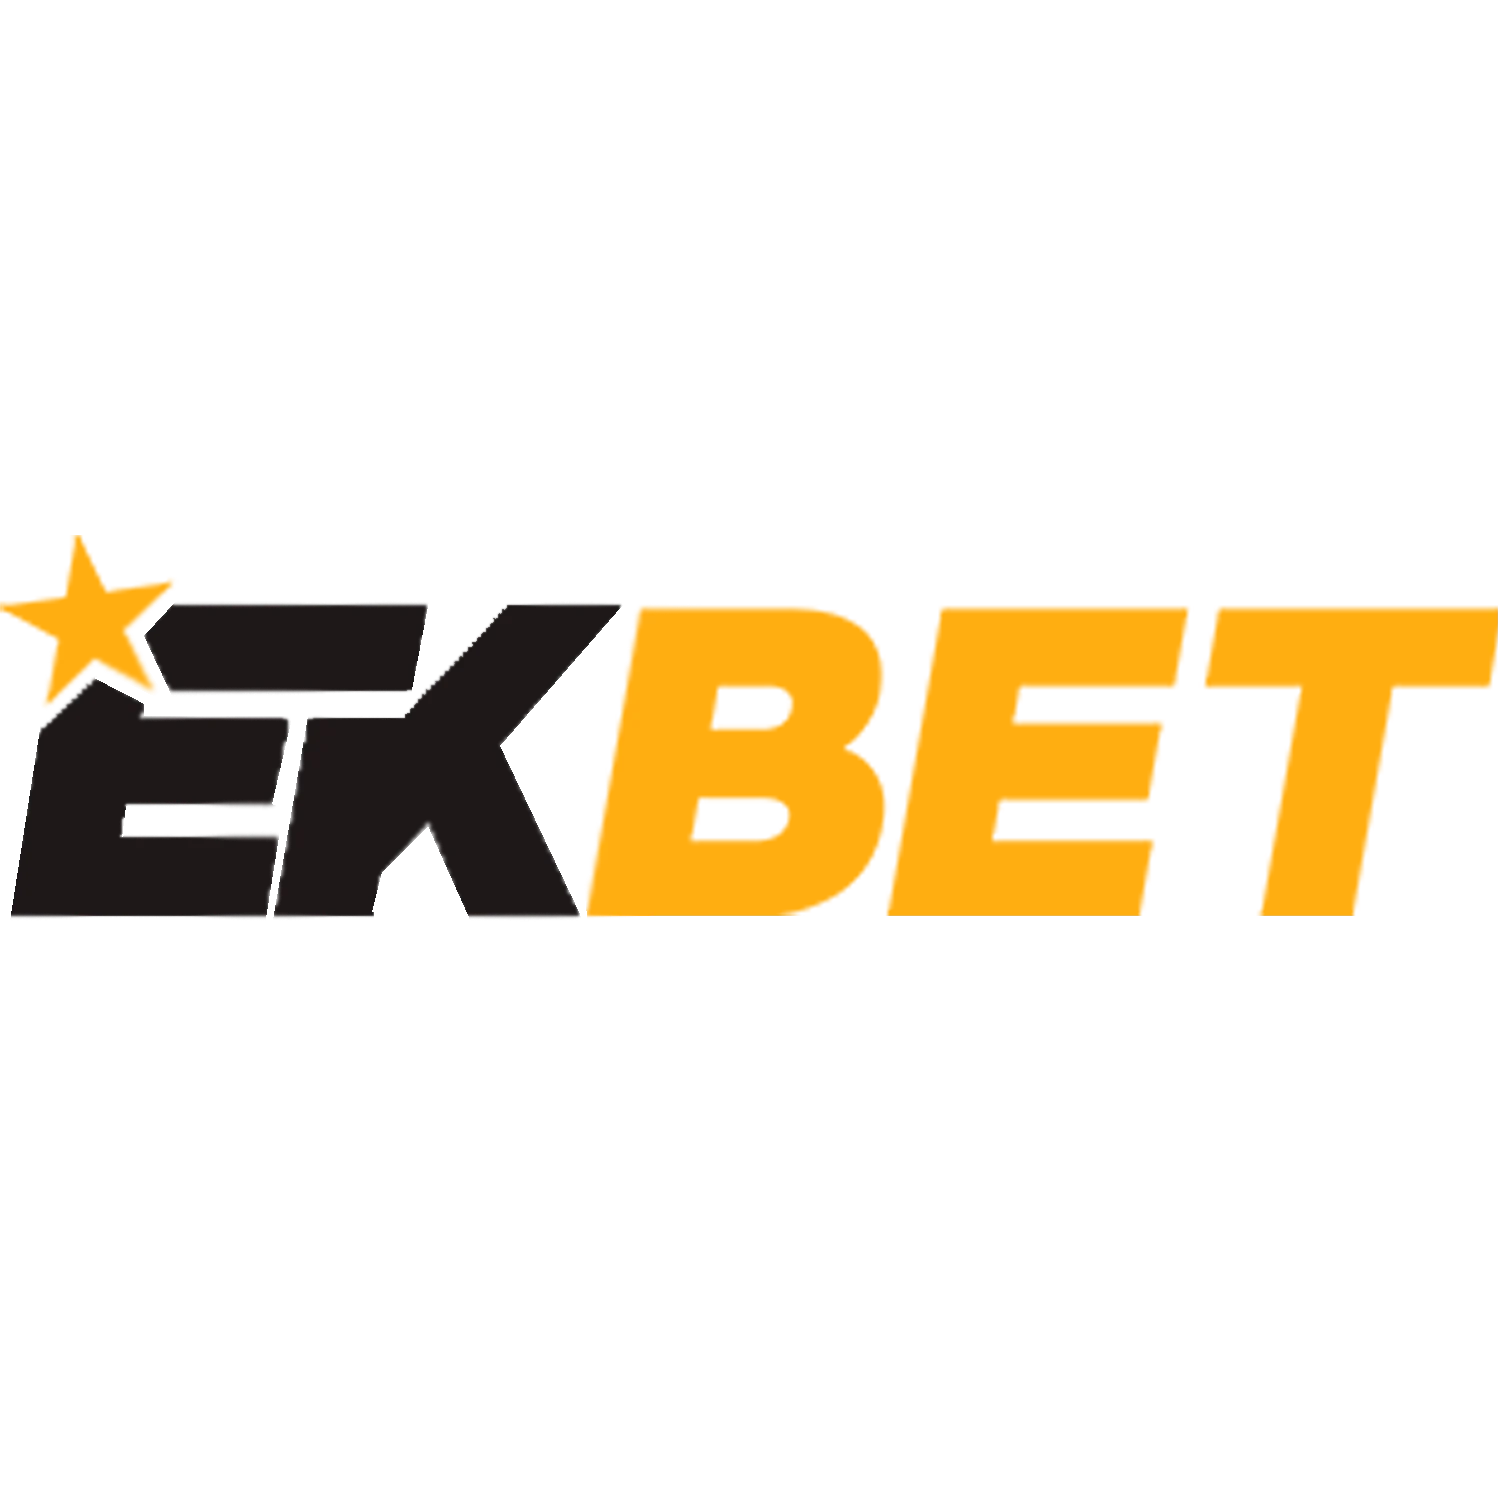 Bet on sports and play online casino at Ekbet.